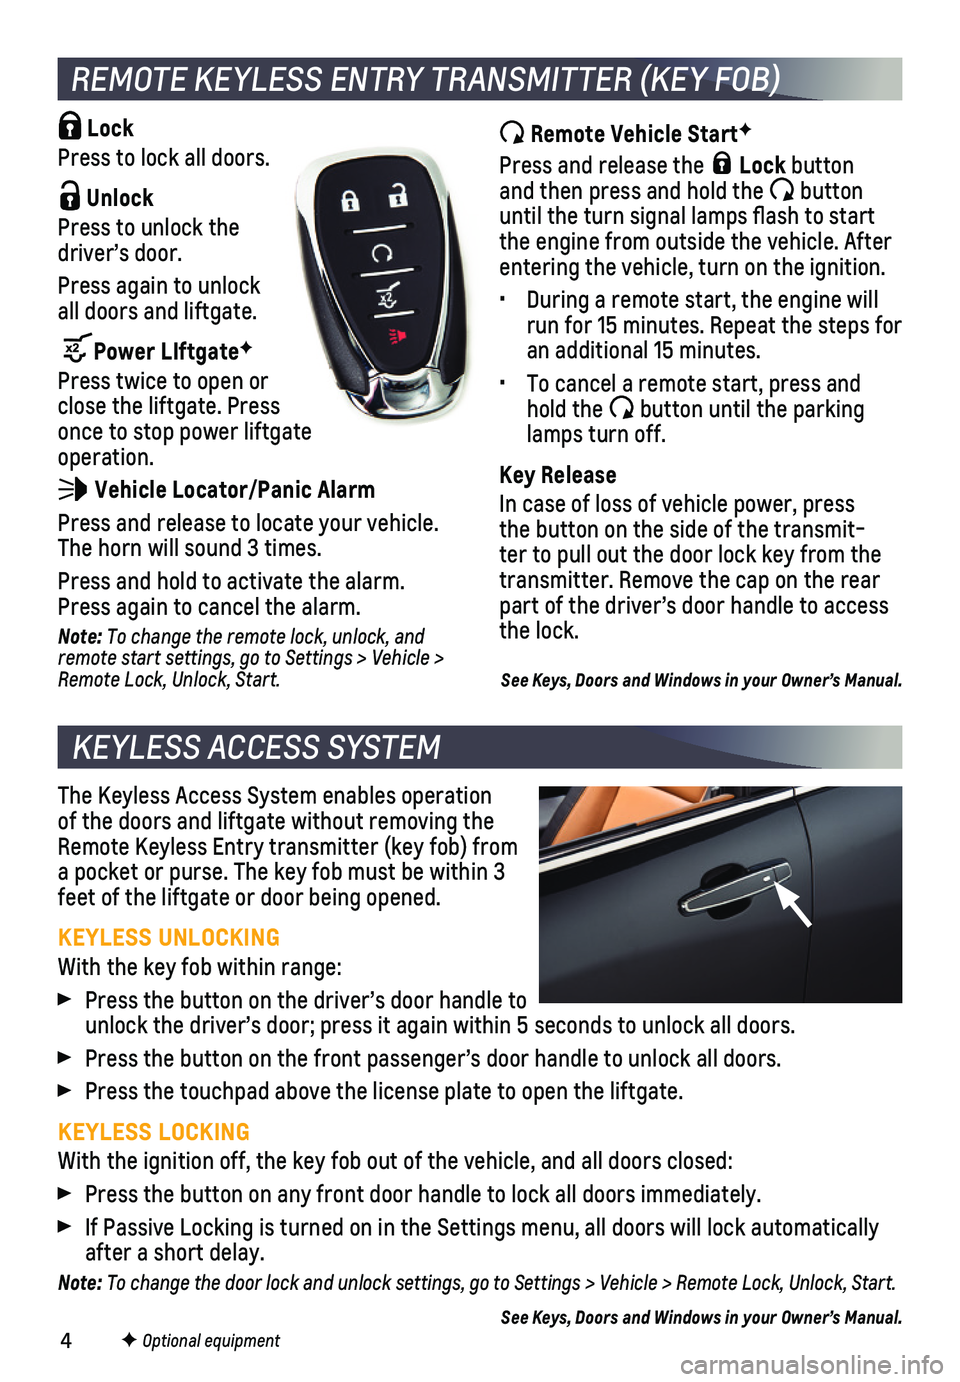 CHEVROLET EQUINOX 2021  Get To Know Guide 4
The Keyless Access System enables operation of the doors and liftgate without removing the Remote Keyless Entry transmitter (key fob) from a pocket or purse. The key fob must be within 3 feet of the